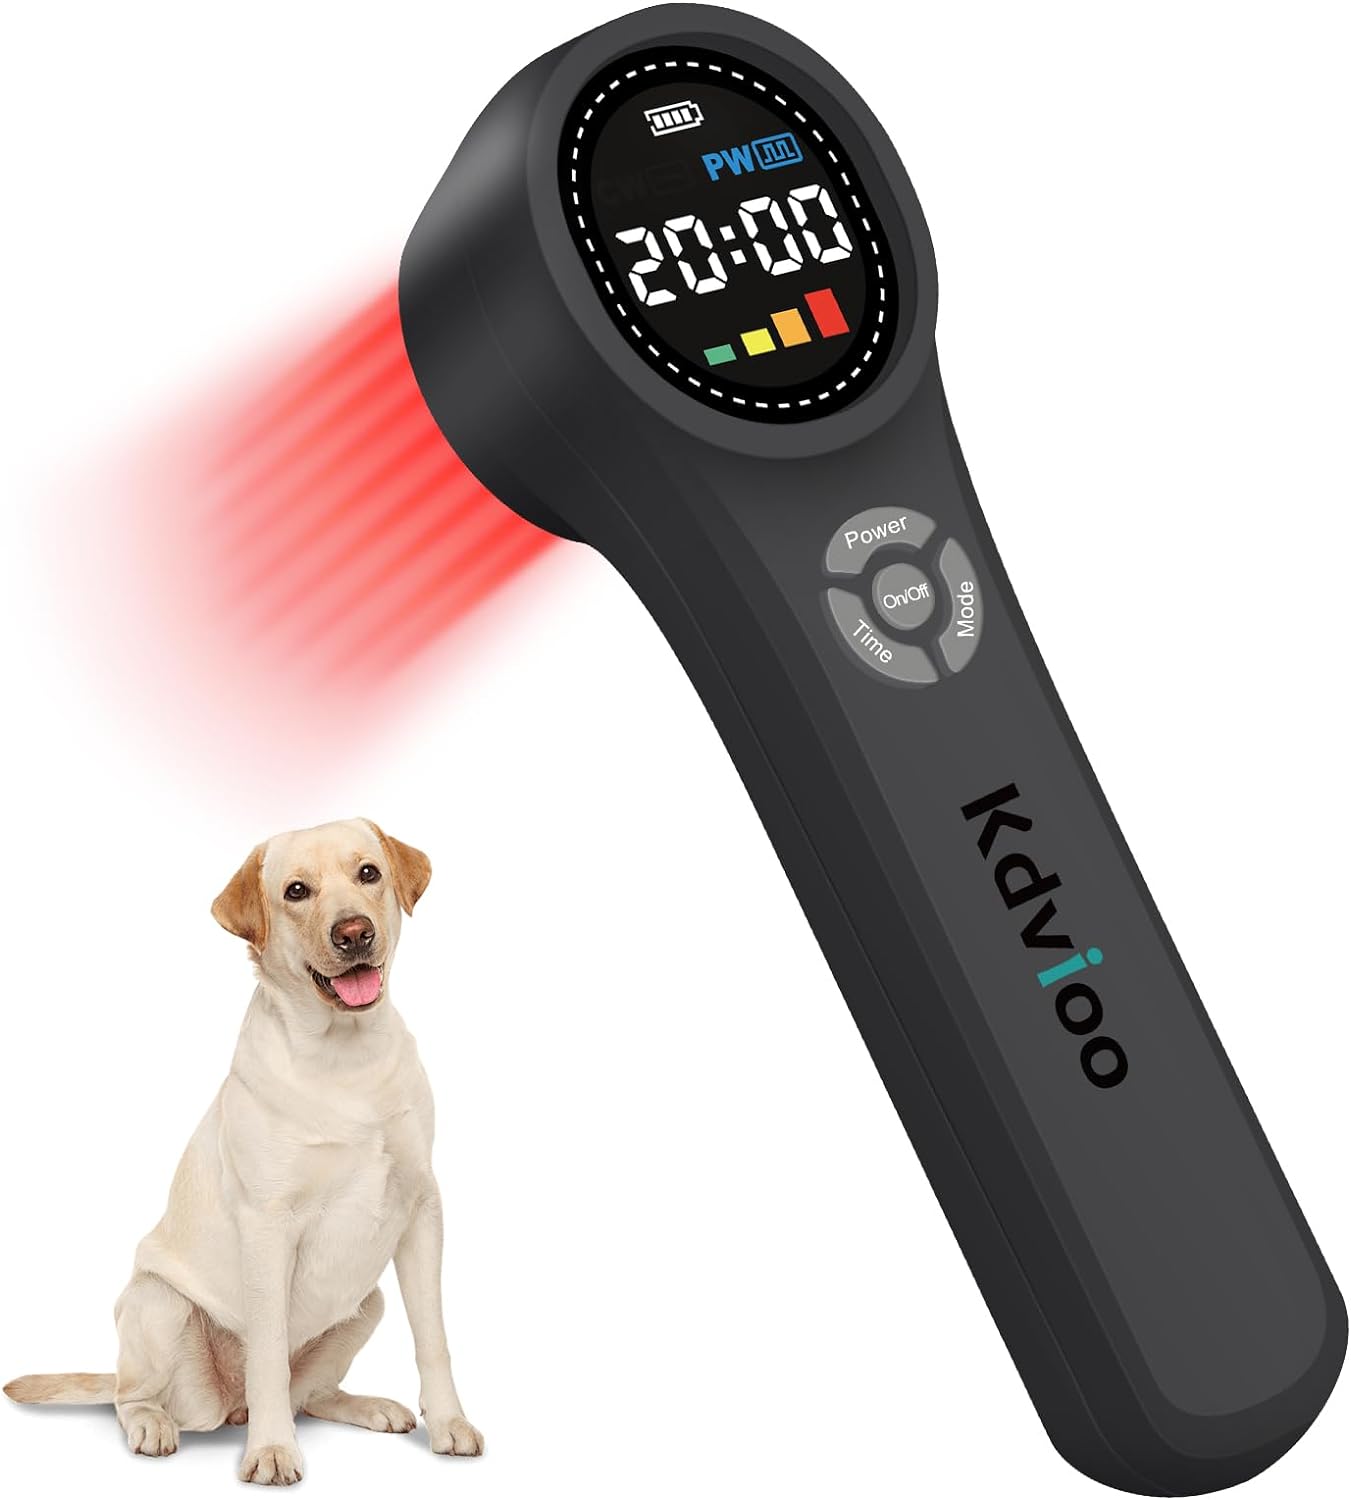 Kdvioo Cold Laser Therapy for Dogs,Red Light Therapy Devices,16x660nm+4x810nm+4x980nm,Infrared Red Light Therapy Machine for Dogs Cats Muscle and Joint Pain Relief,Handheld Infrared Light for Pet/Vet